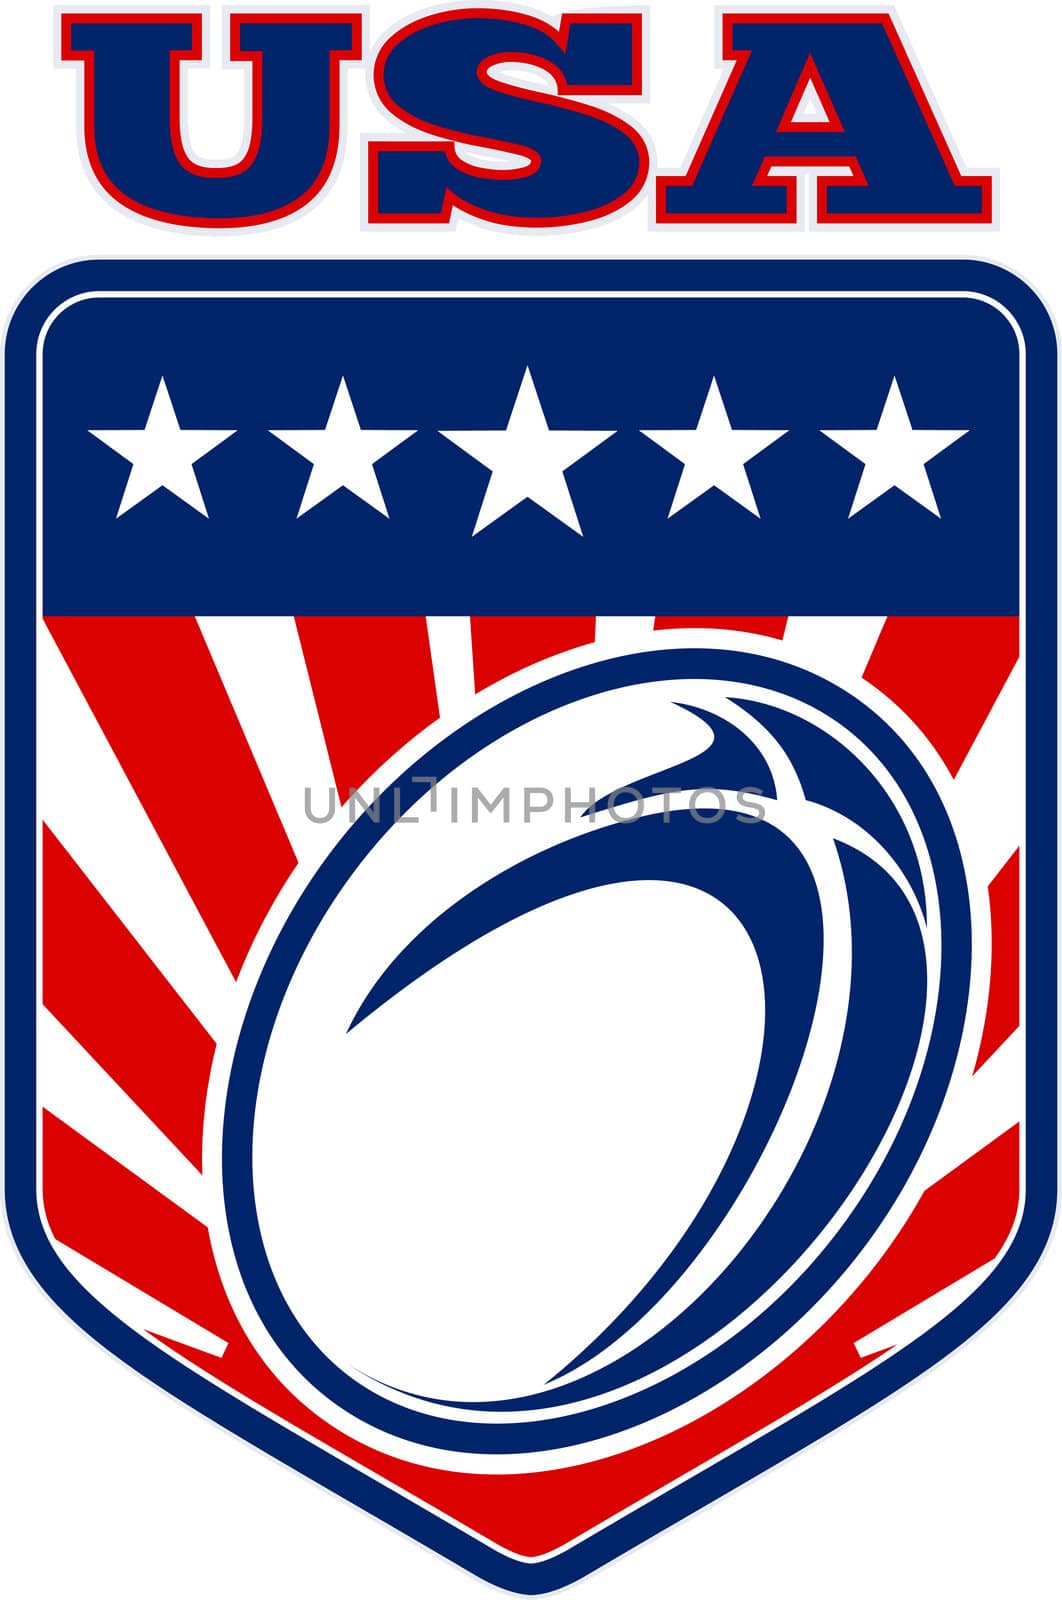 illustration of a rugby ball with stars stripes and sunburst set inside shield with words "USA" united staes of america